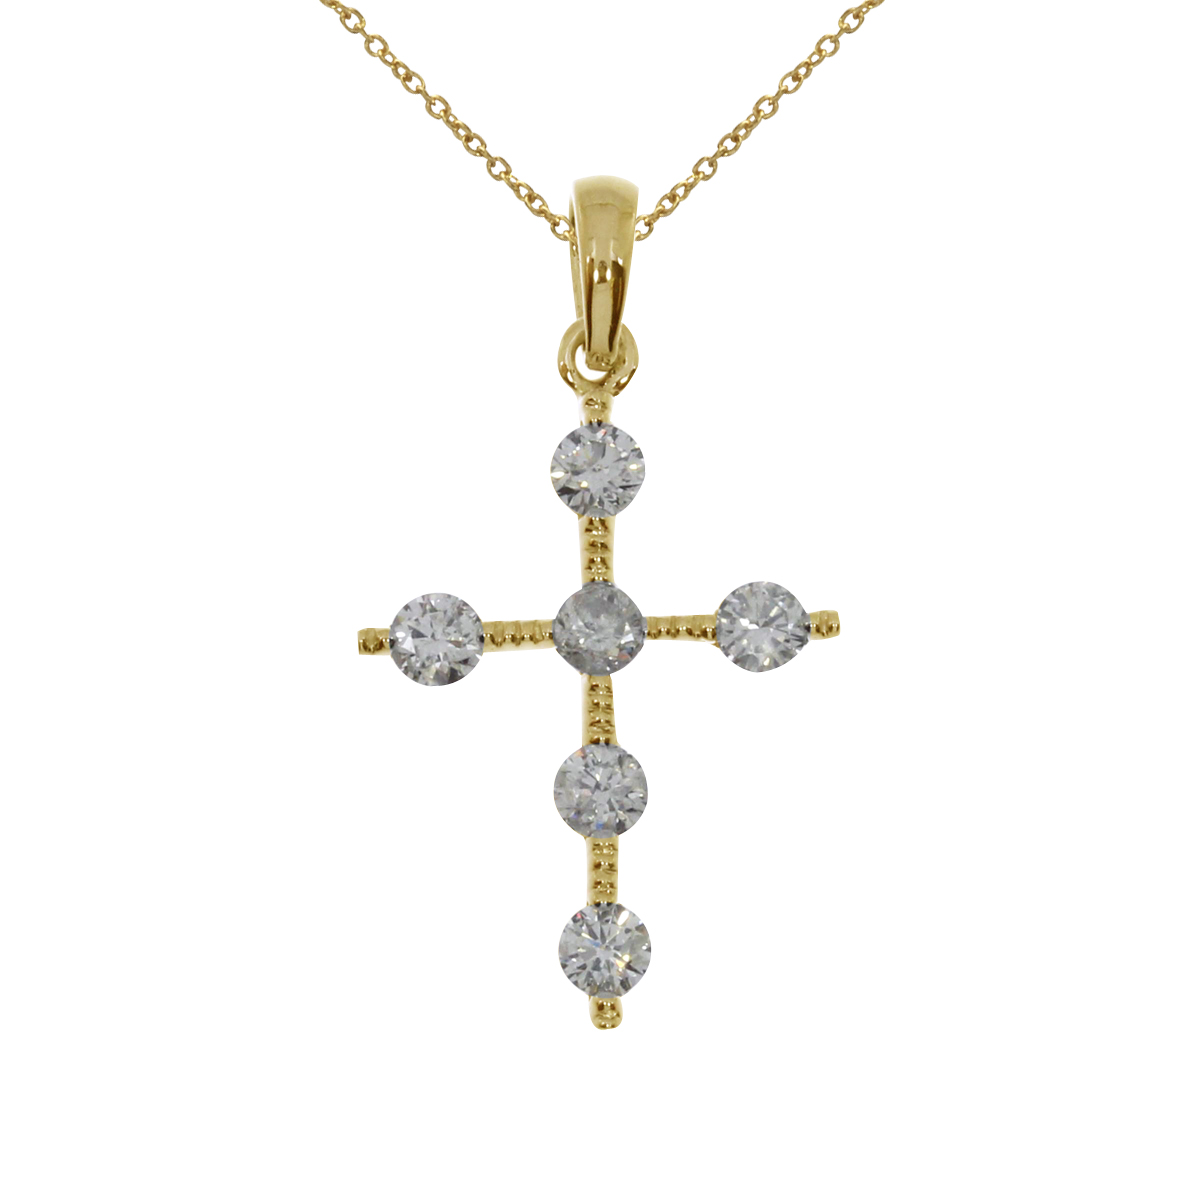 14k yellow gold cross pendant with shimmering diamonds.